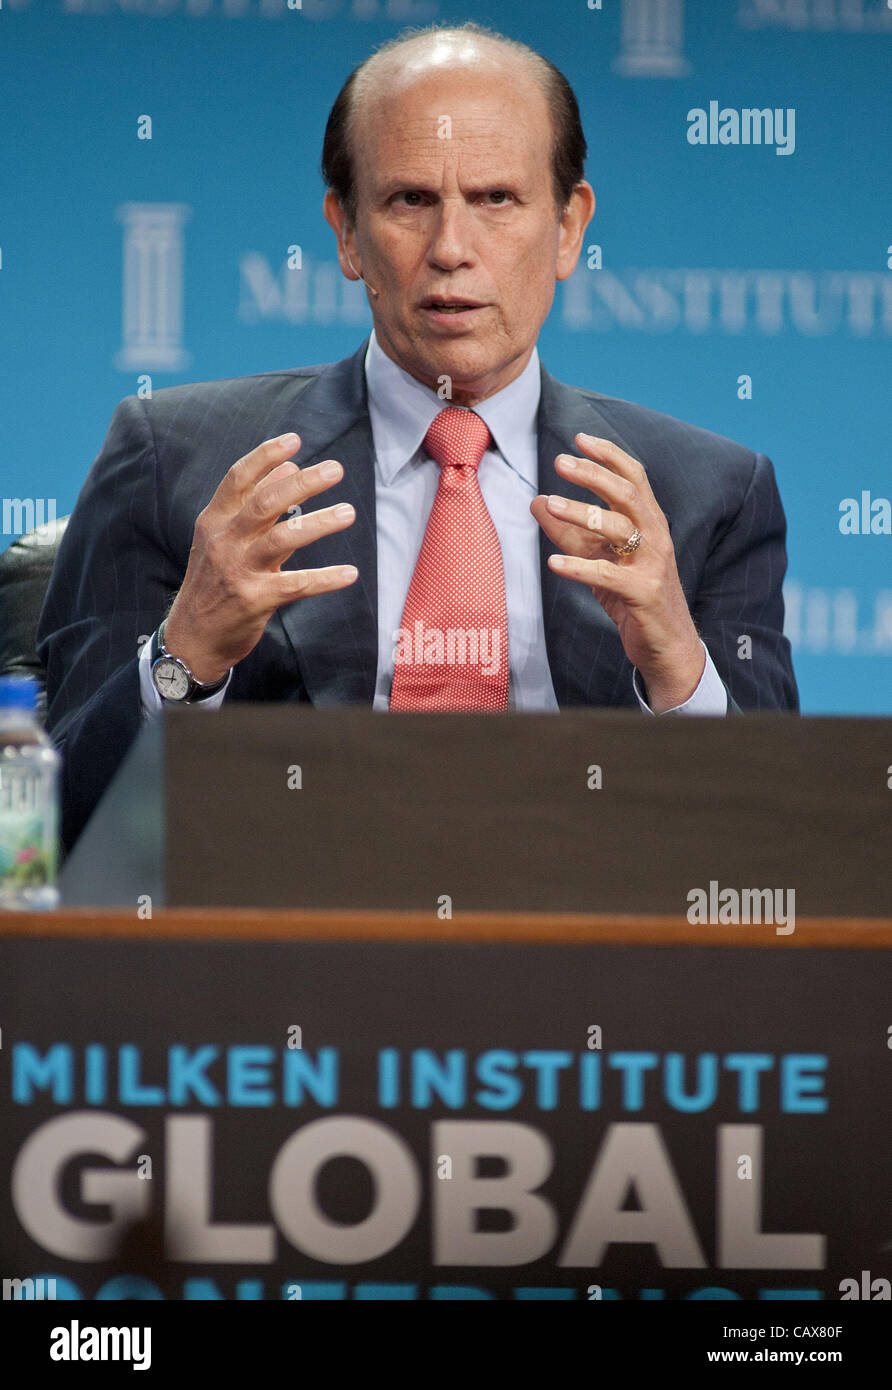 April 30, 2012 - Beverly Hills, California, USA - Michael Milken, Chairman, Milken Institute at the panel discussion entitled 'Mike Milken Interviews Eike Batista and T. Boone Pickens'  during the Milken Institute Global Conference held Monday, April 30 2012 at the Hilton Hotel in Beverly Hills, Cal Stock Photo